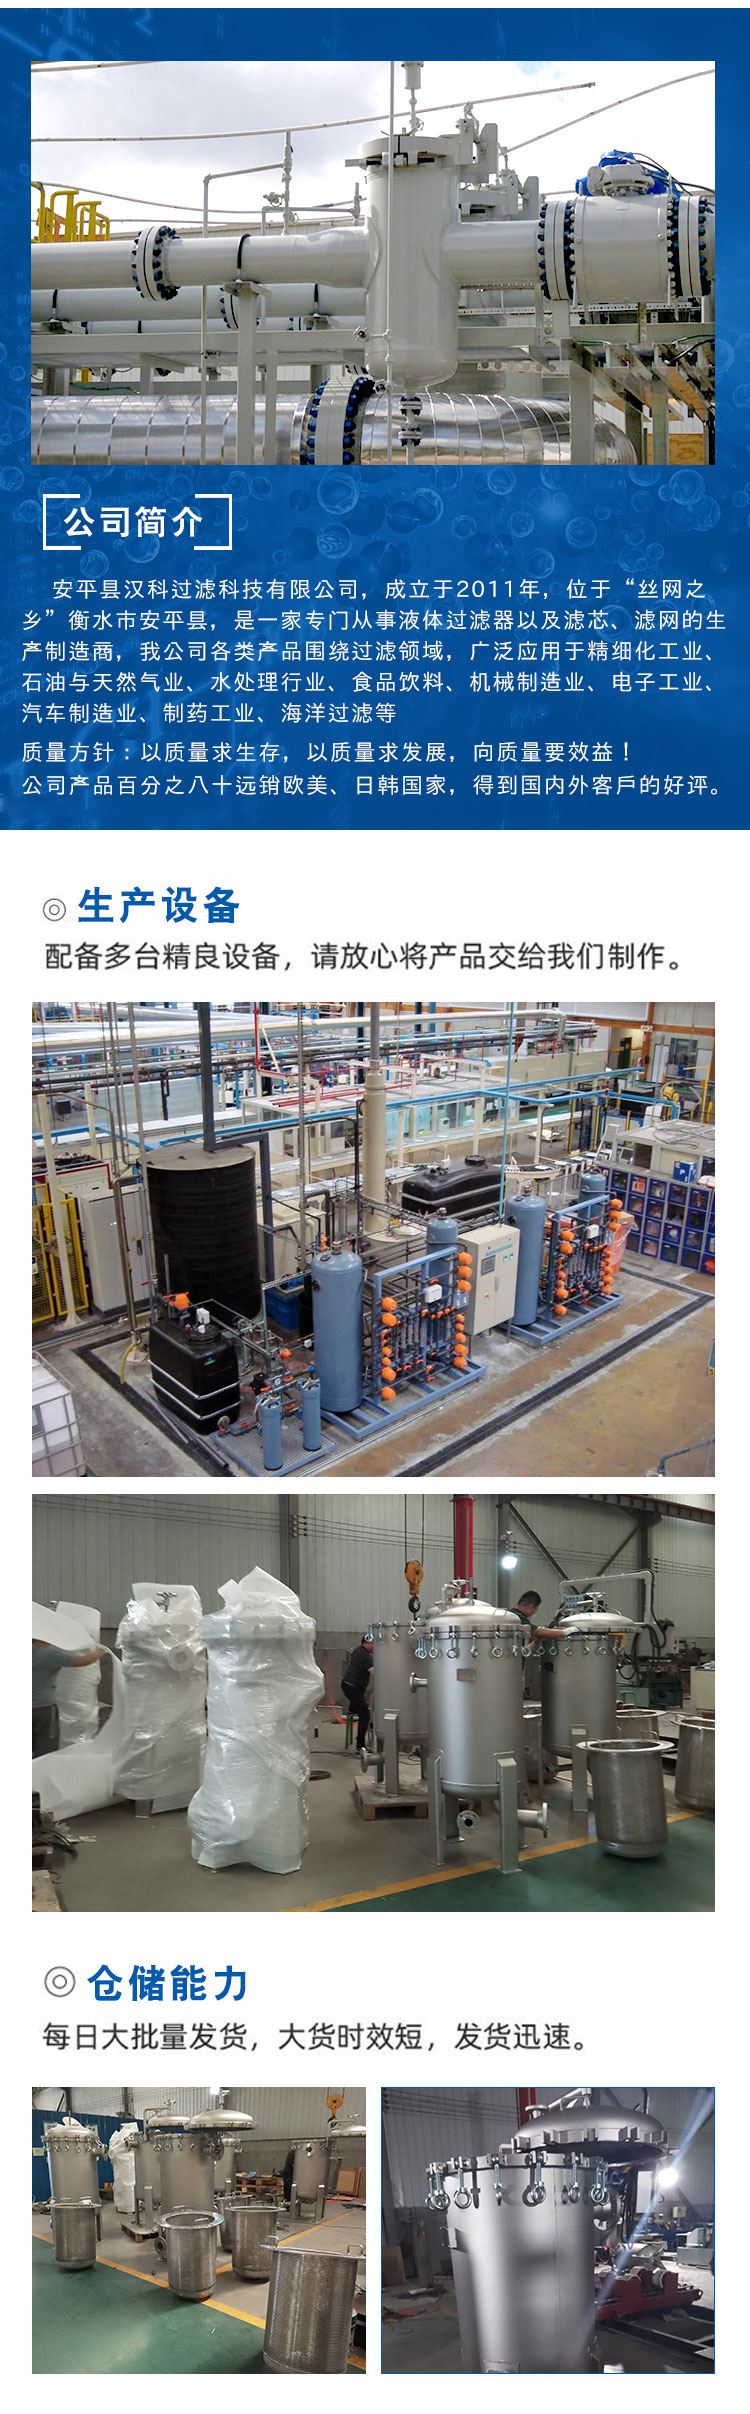 Solid liquid filtration separation Hanke stainless steel bag filter Pulp and paper industry water sales